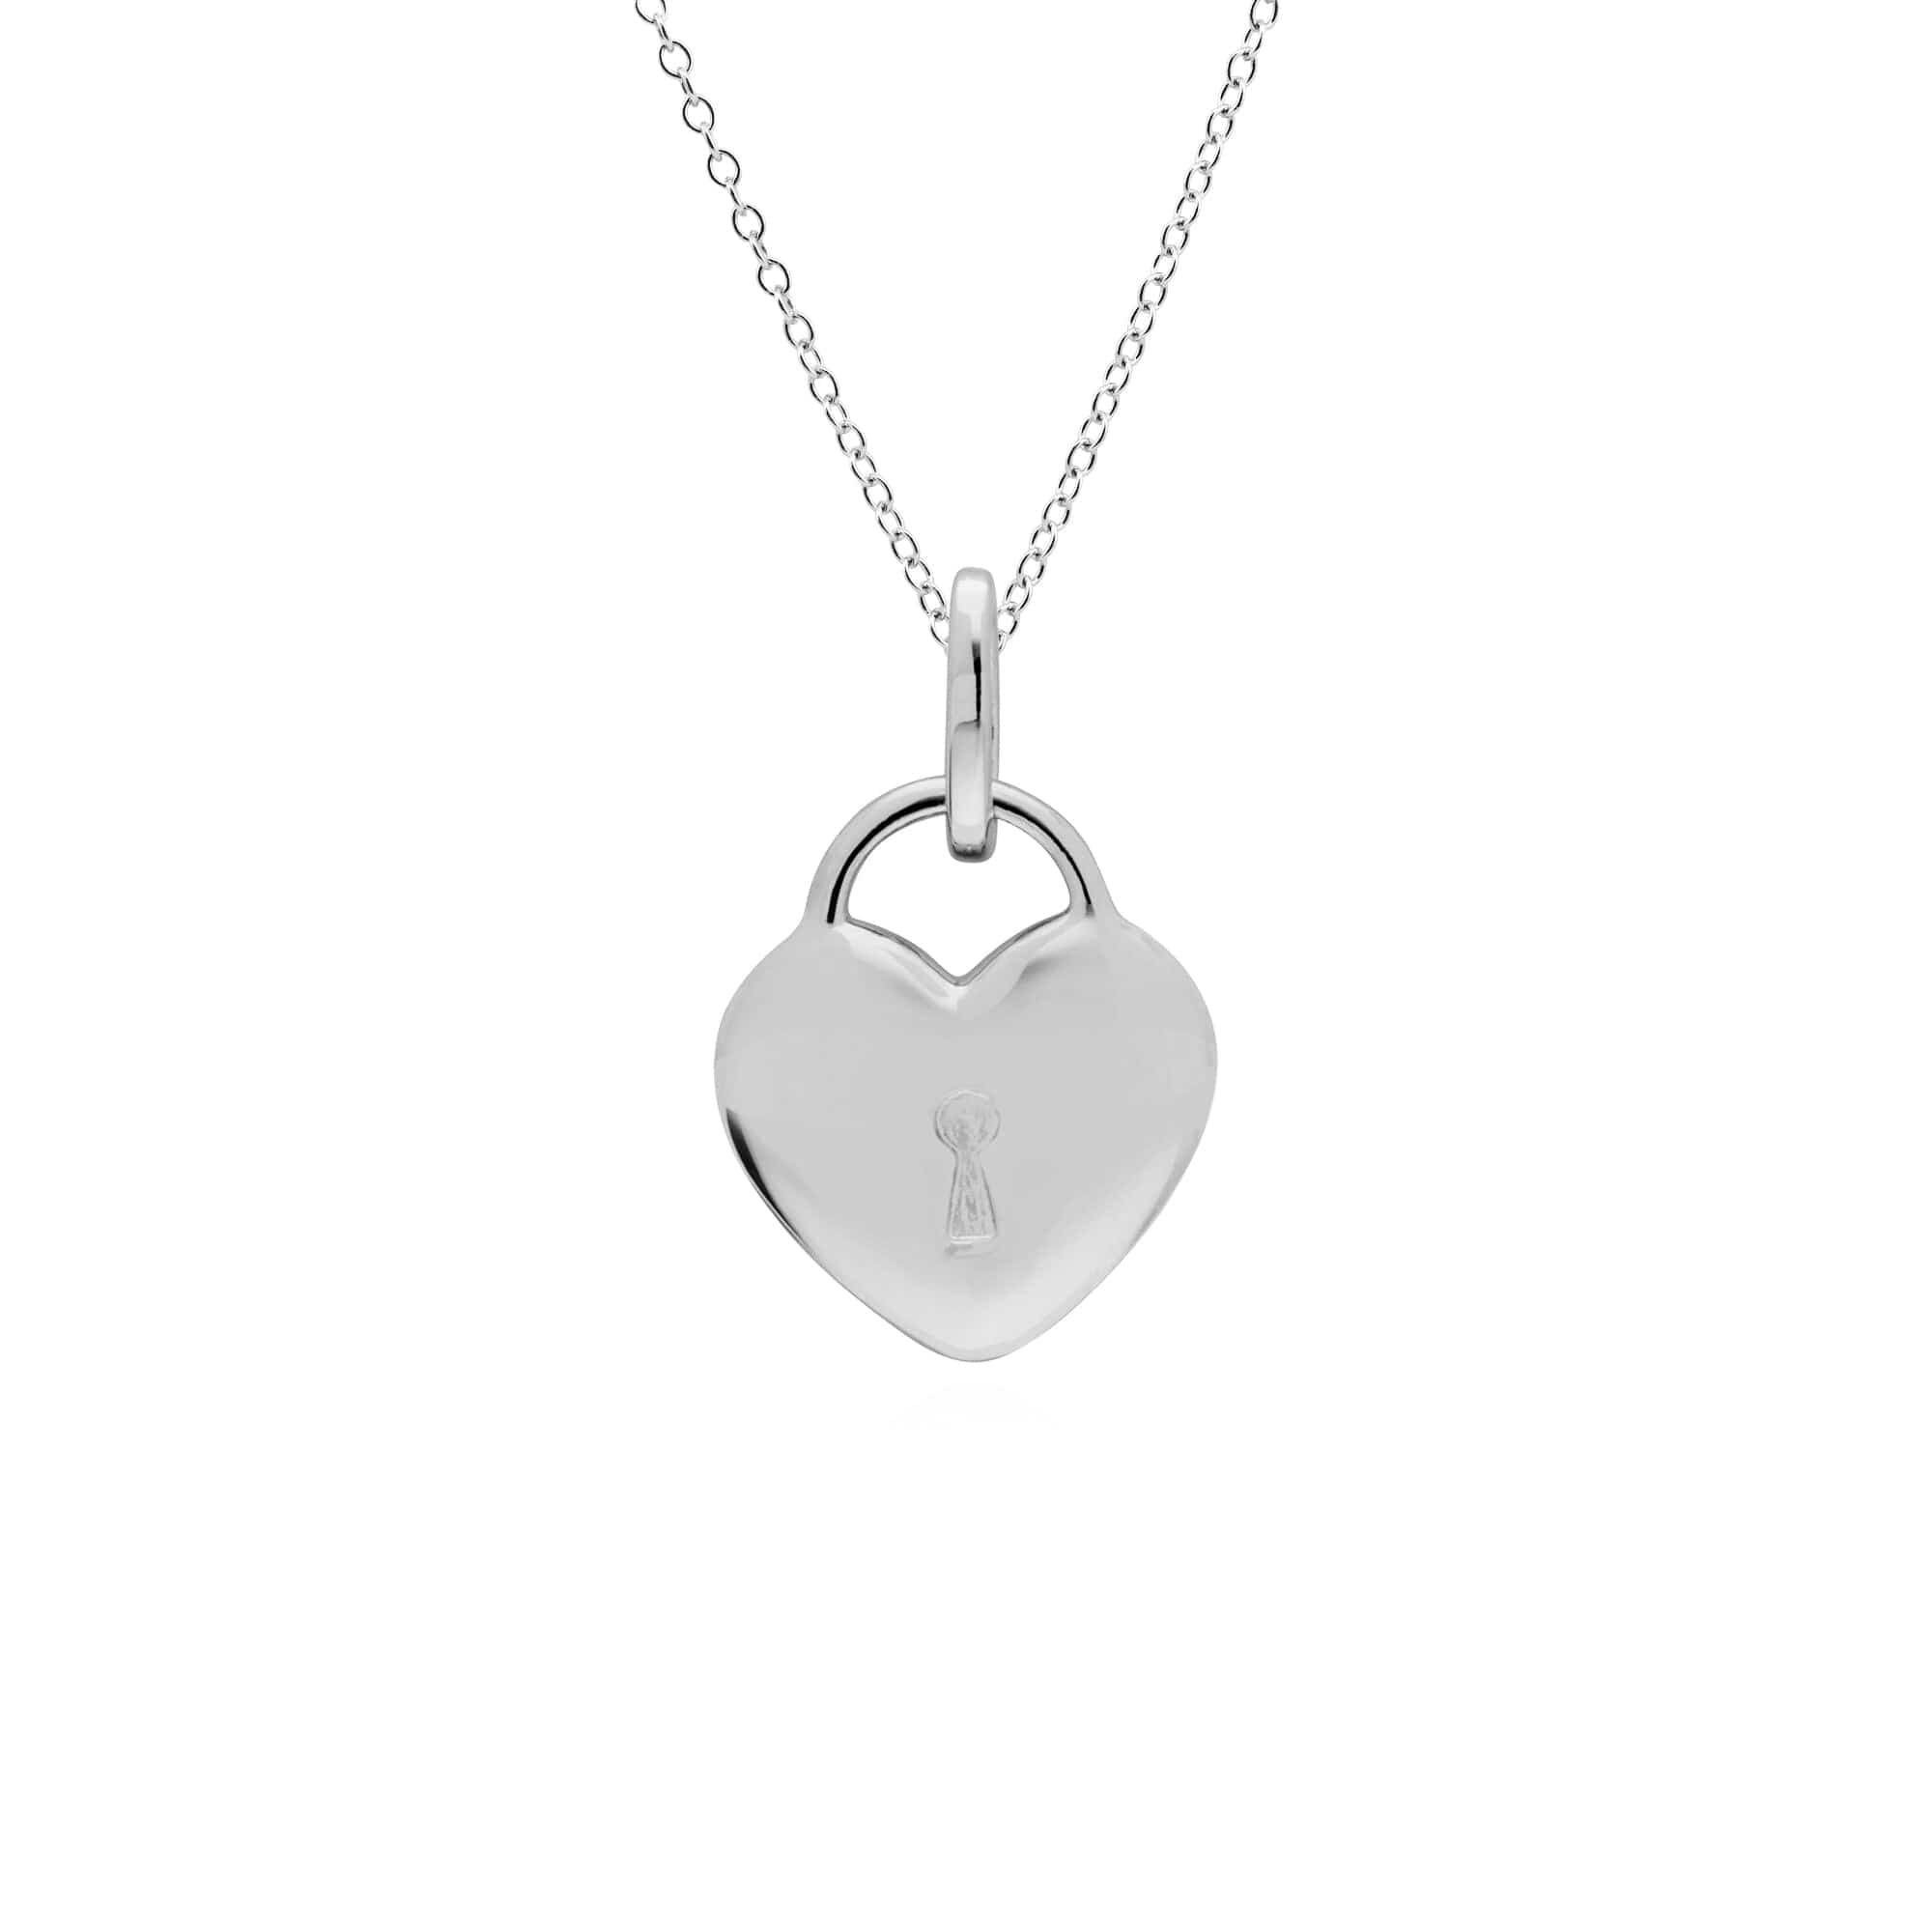 270P028403925-270P027001925 Classic Heart Lock Pendant & Jade Charm in 925 Sterling Silver 3